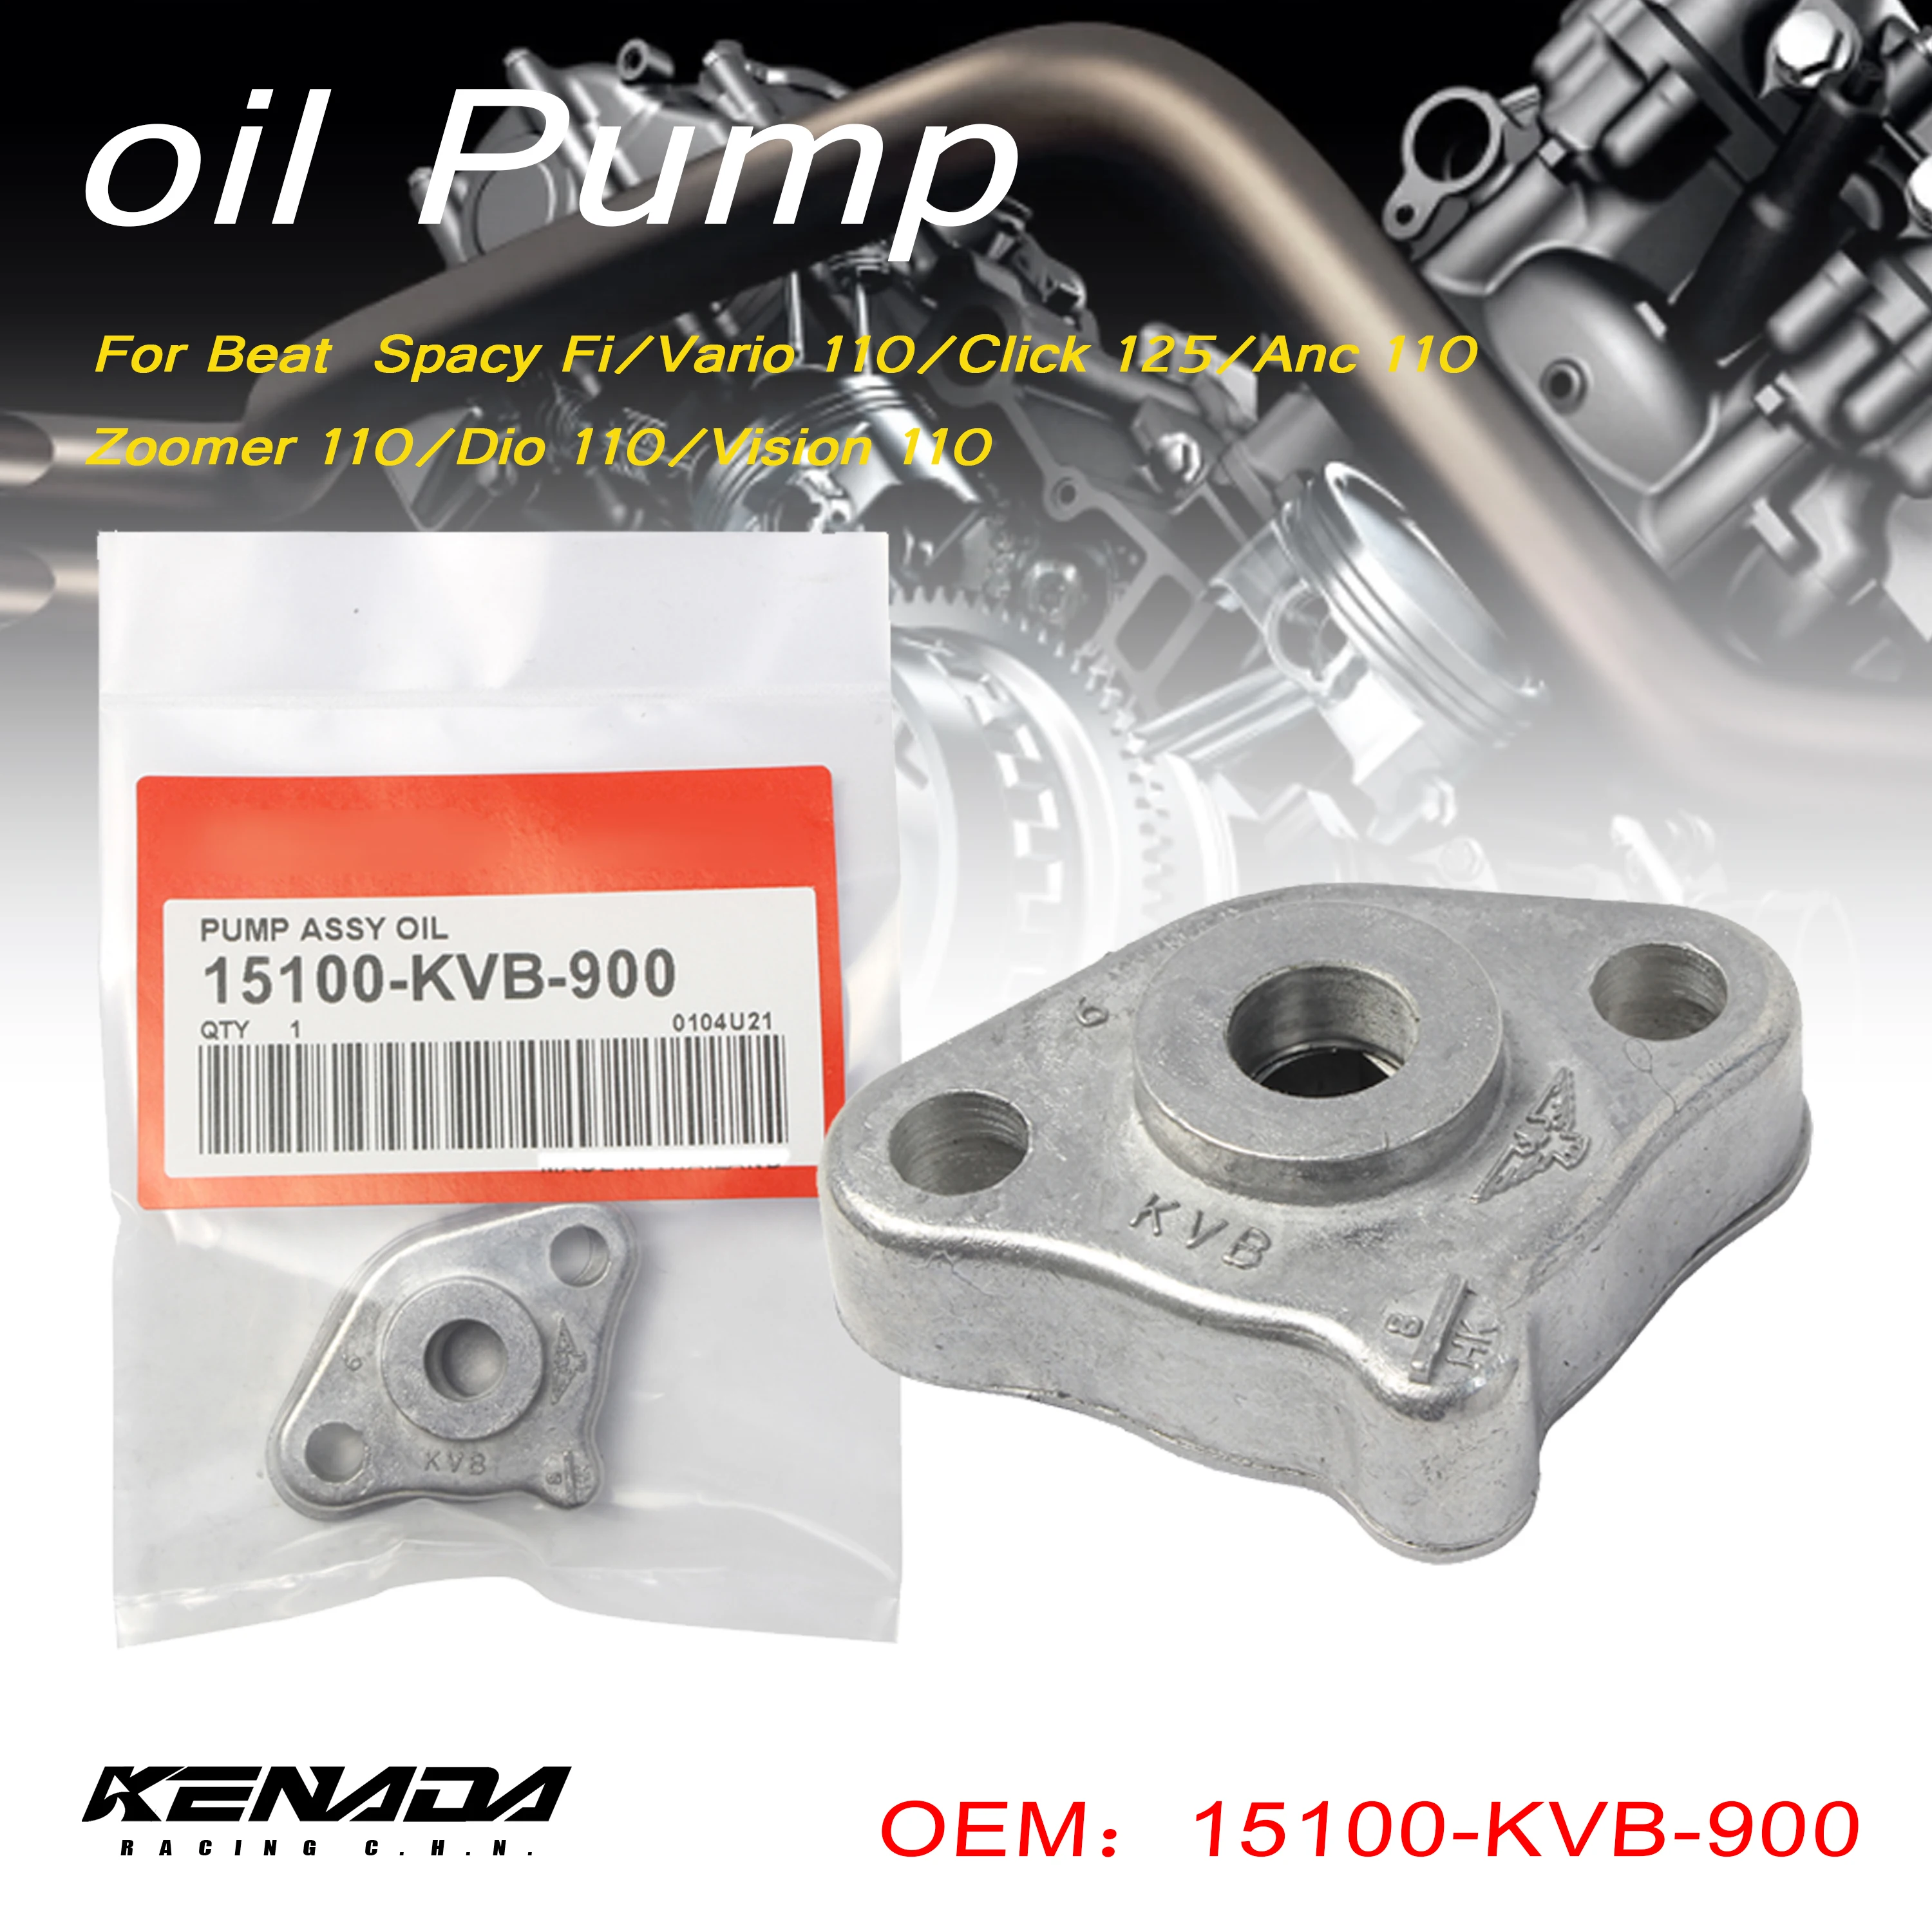 

Oil Pump Assy For Beat Spacy Fi/Vario 110/Click 125/Anc 110/Zoomer 110/Dio 110/Vision 110 15100-KVB-900